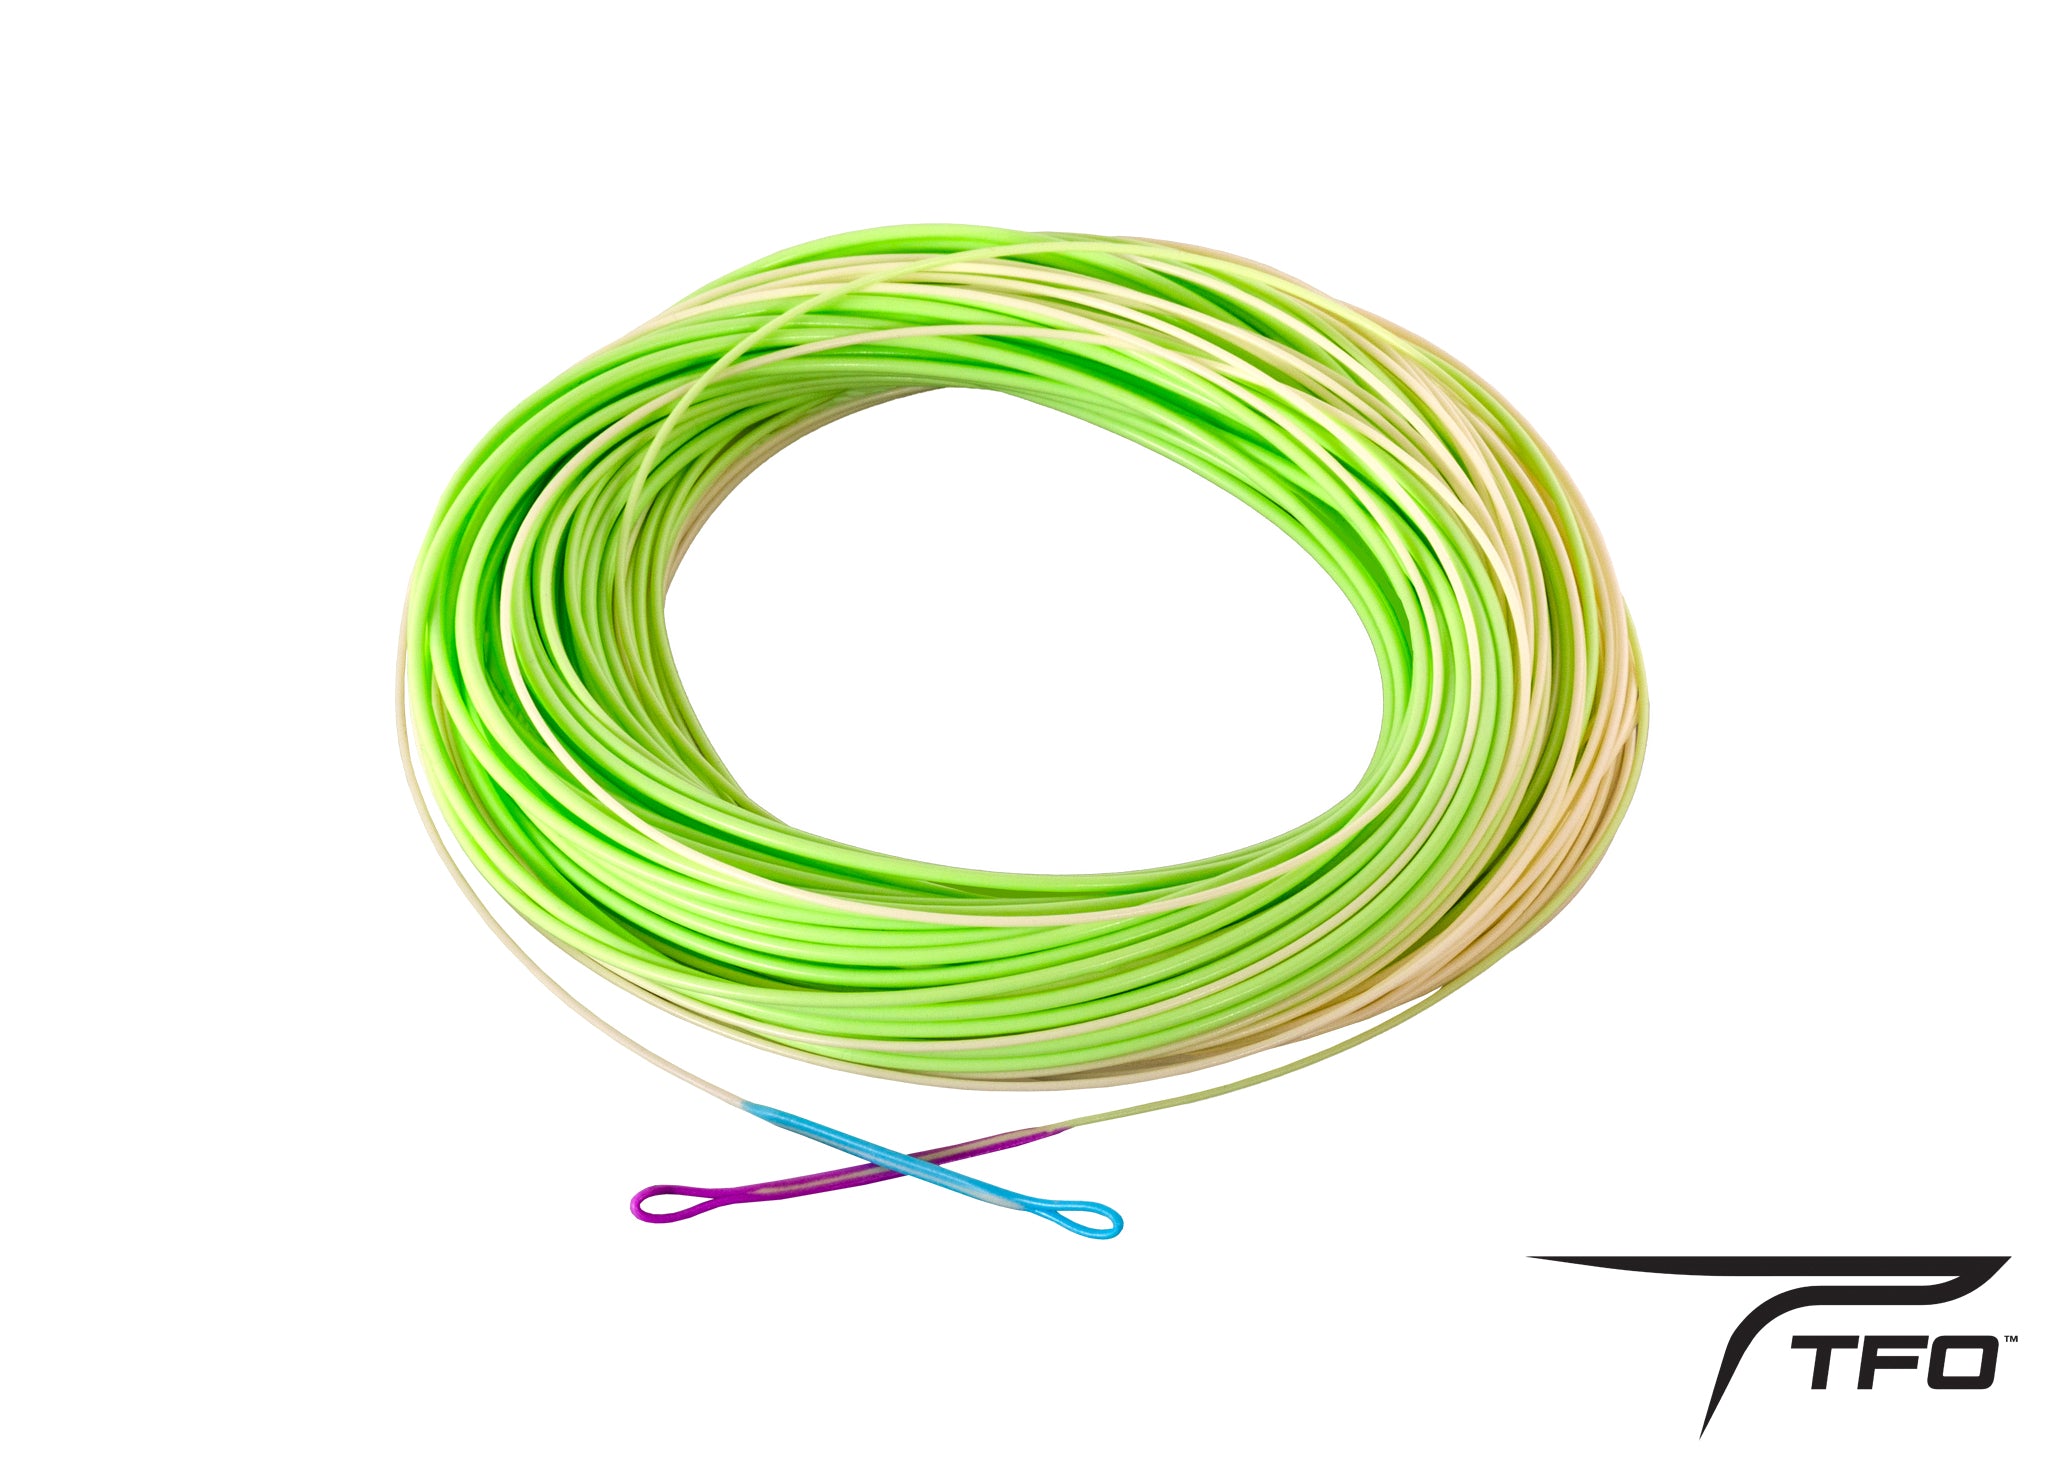 Airflo Forge Weight Forward Floating Fly Line – Natural Sports - The  Fishing Store